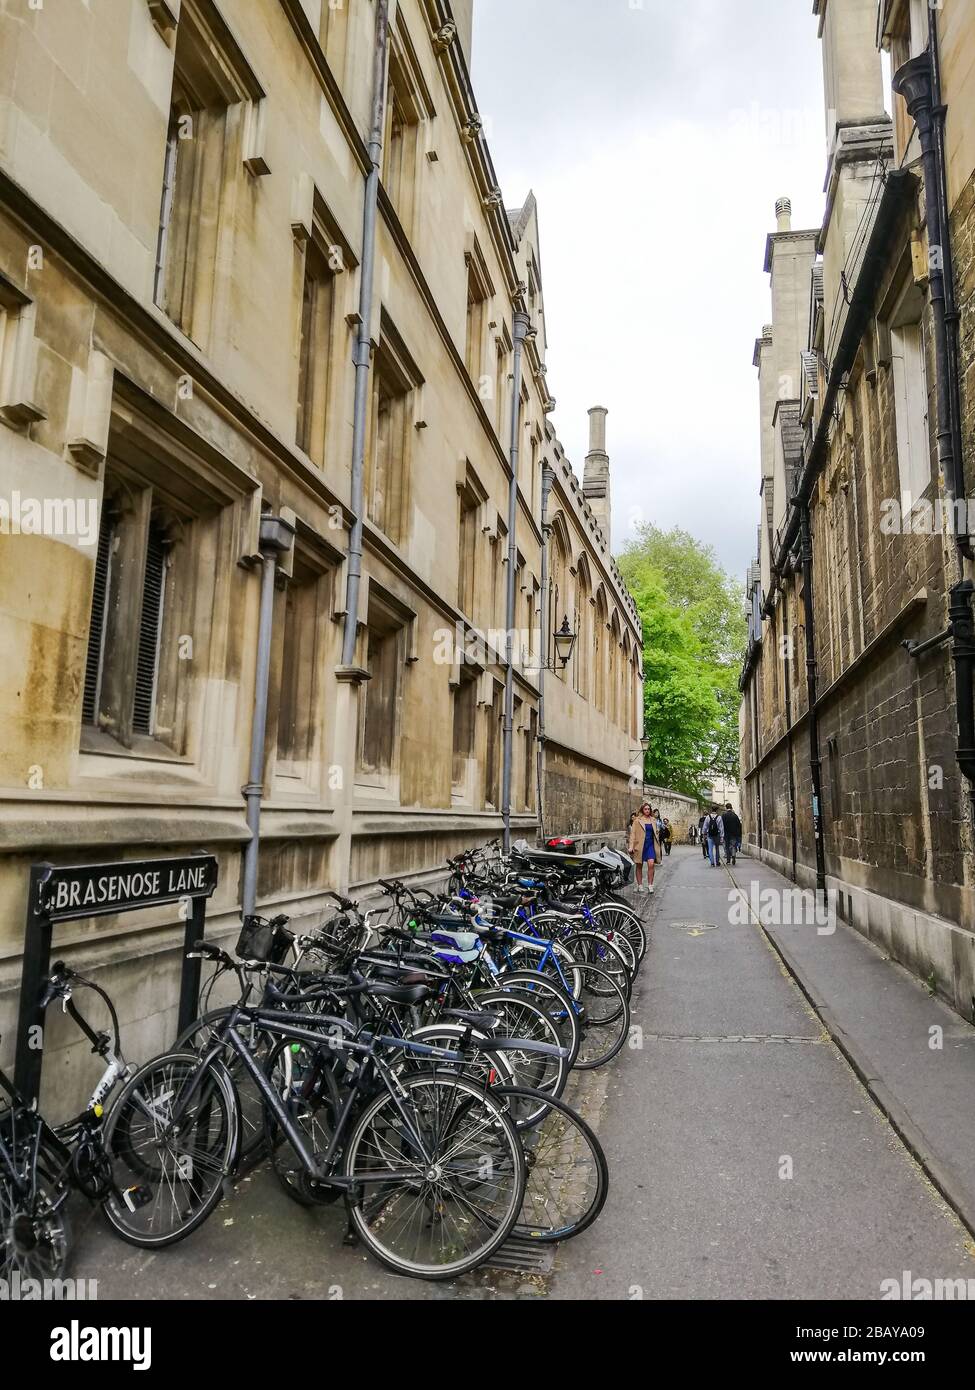 Brasenose lane, Oxford, England, United Kingdom. June 2019. Typical english street in the city of dreaming spires (stone architecture). Bike parking Stock Photo